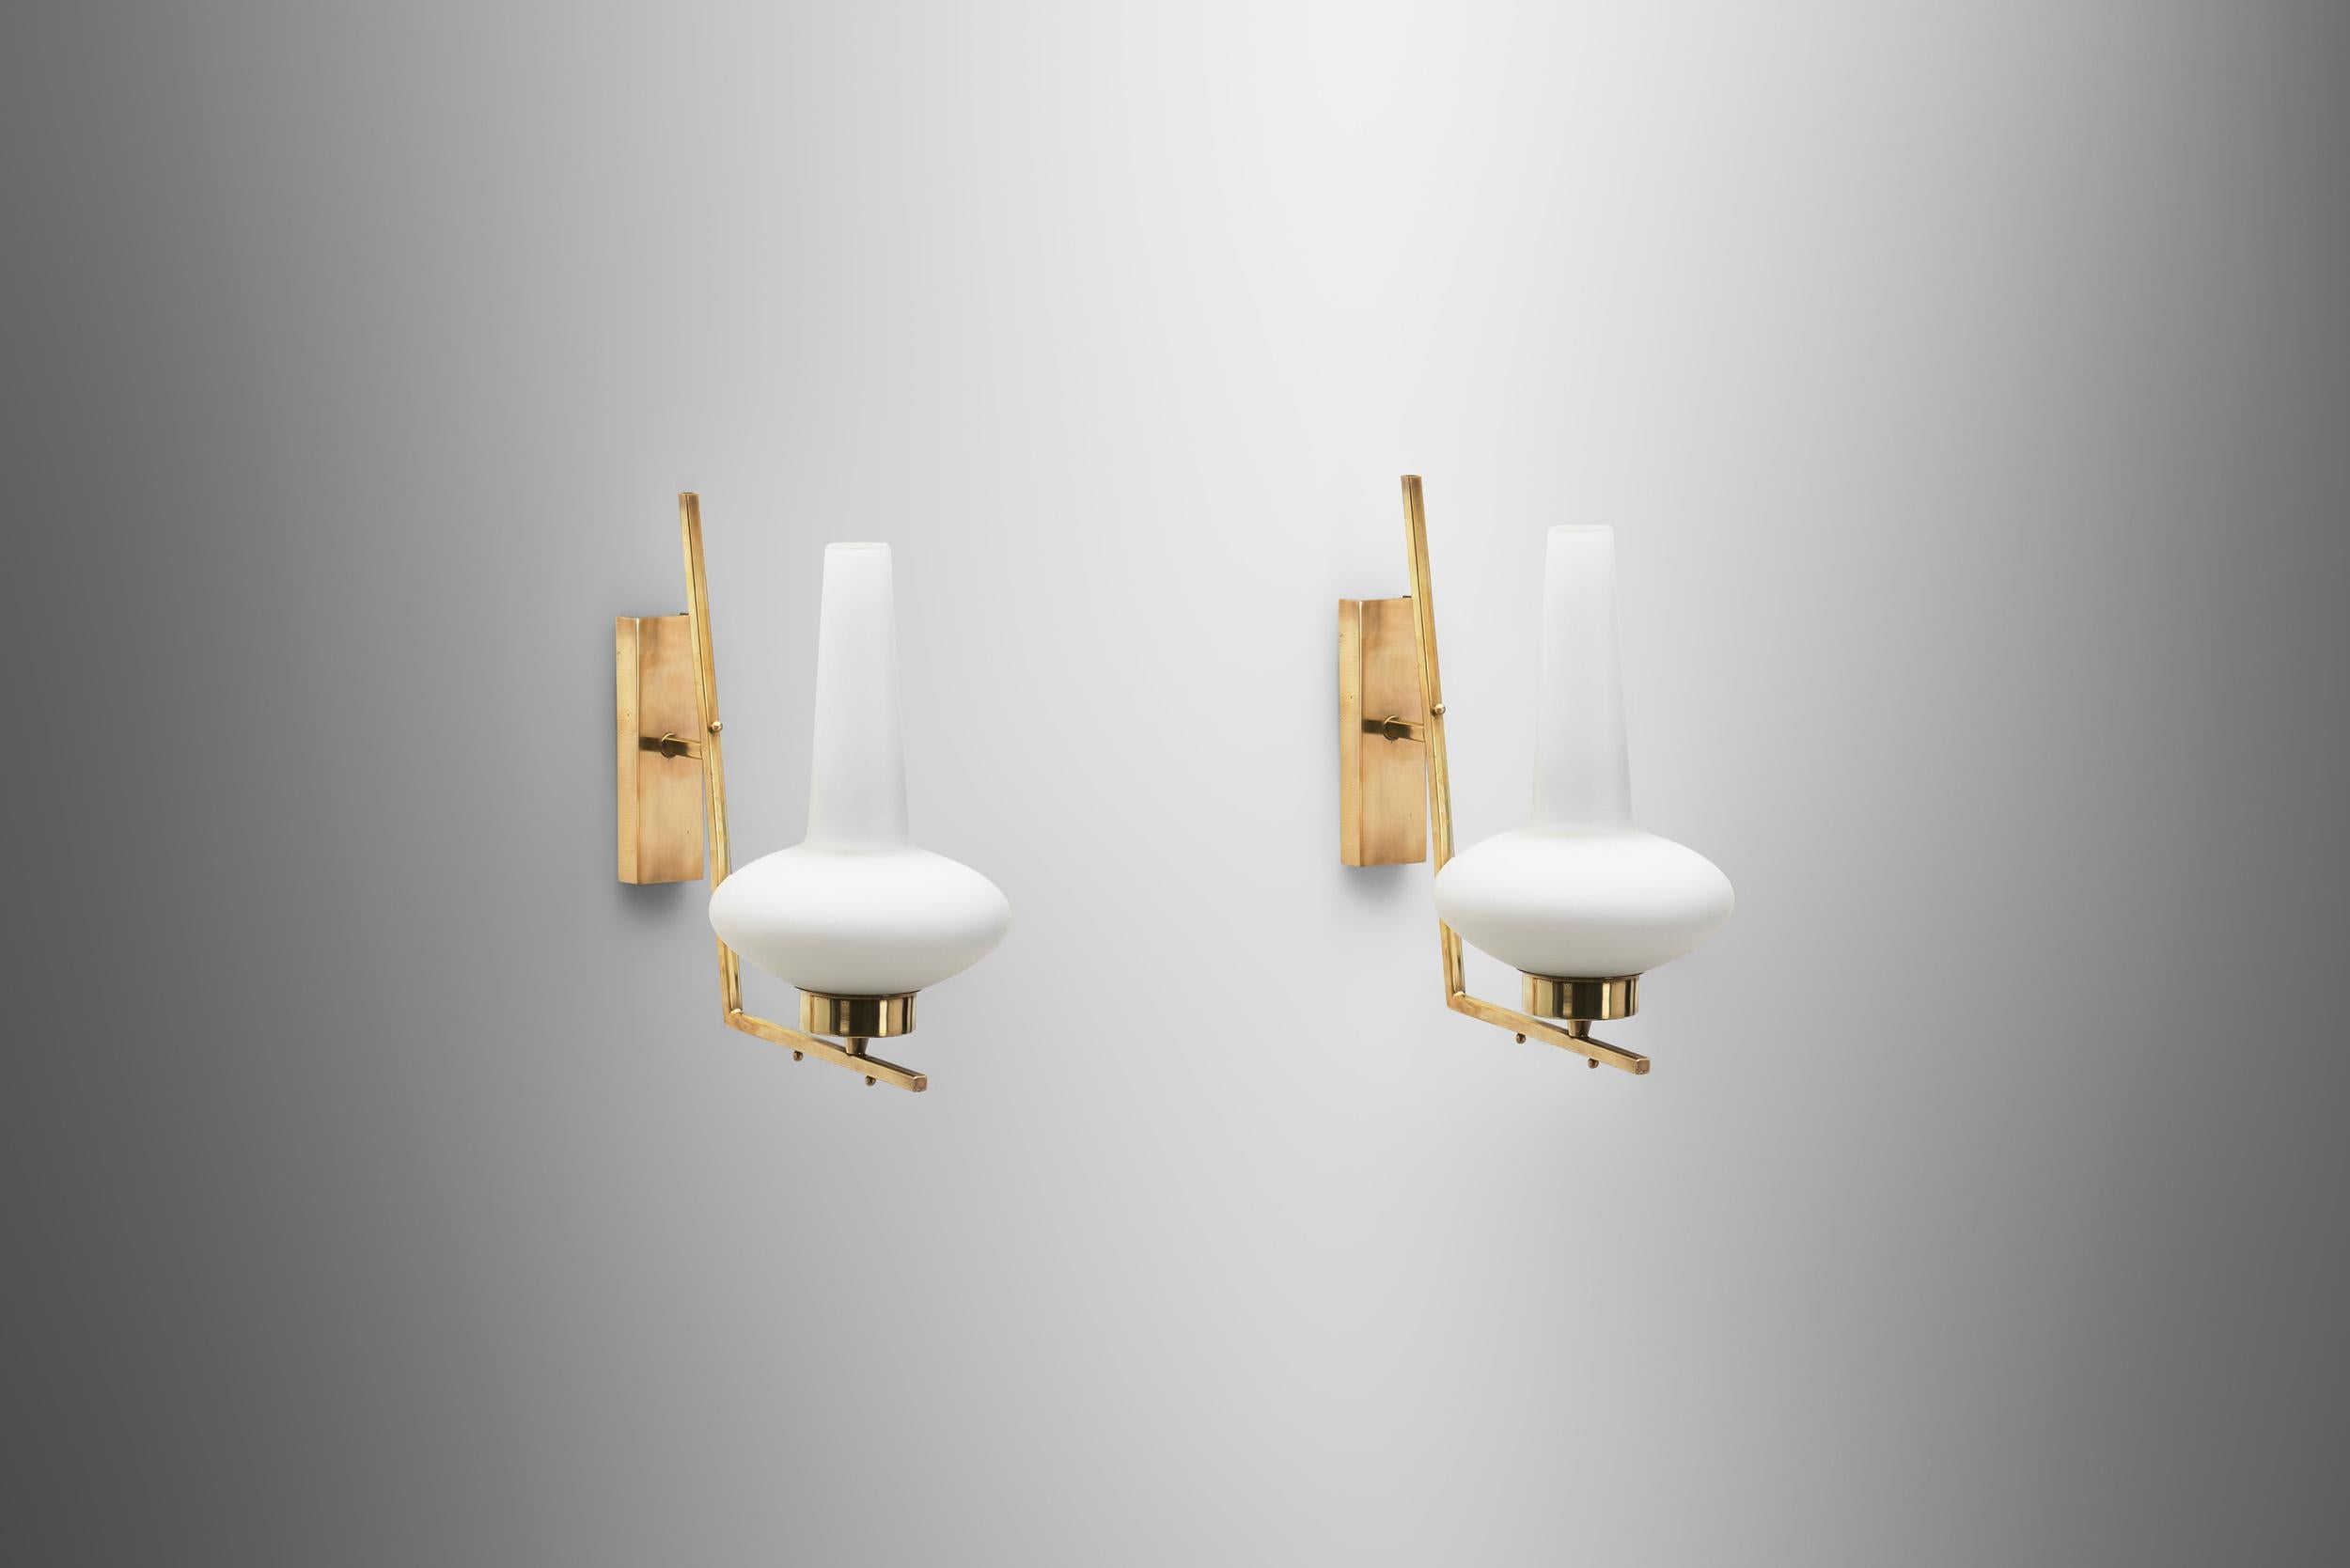 Italian Mid-Century Modern Brass Wall Lamps, Italy, 1950s For Sale 1